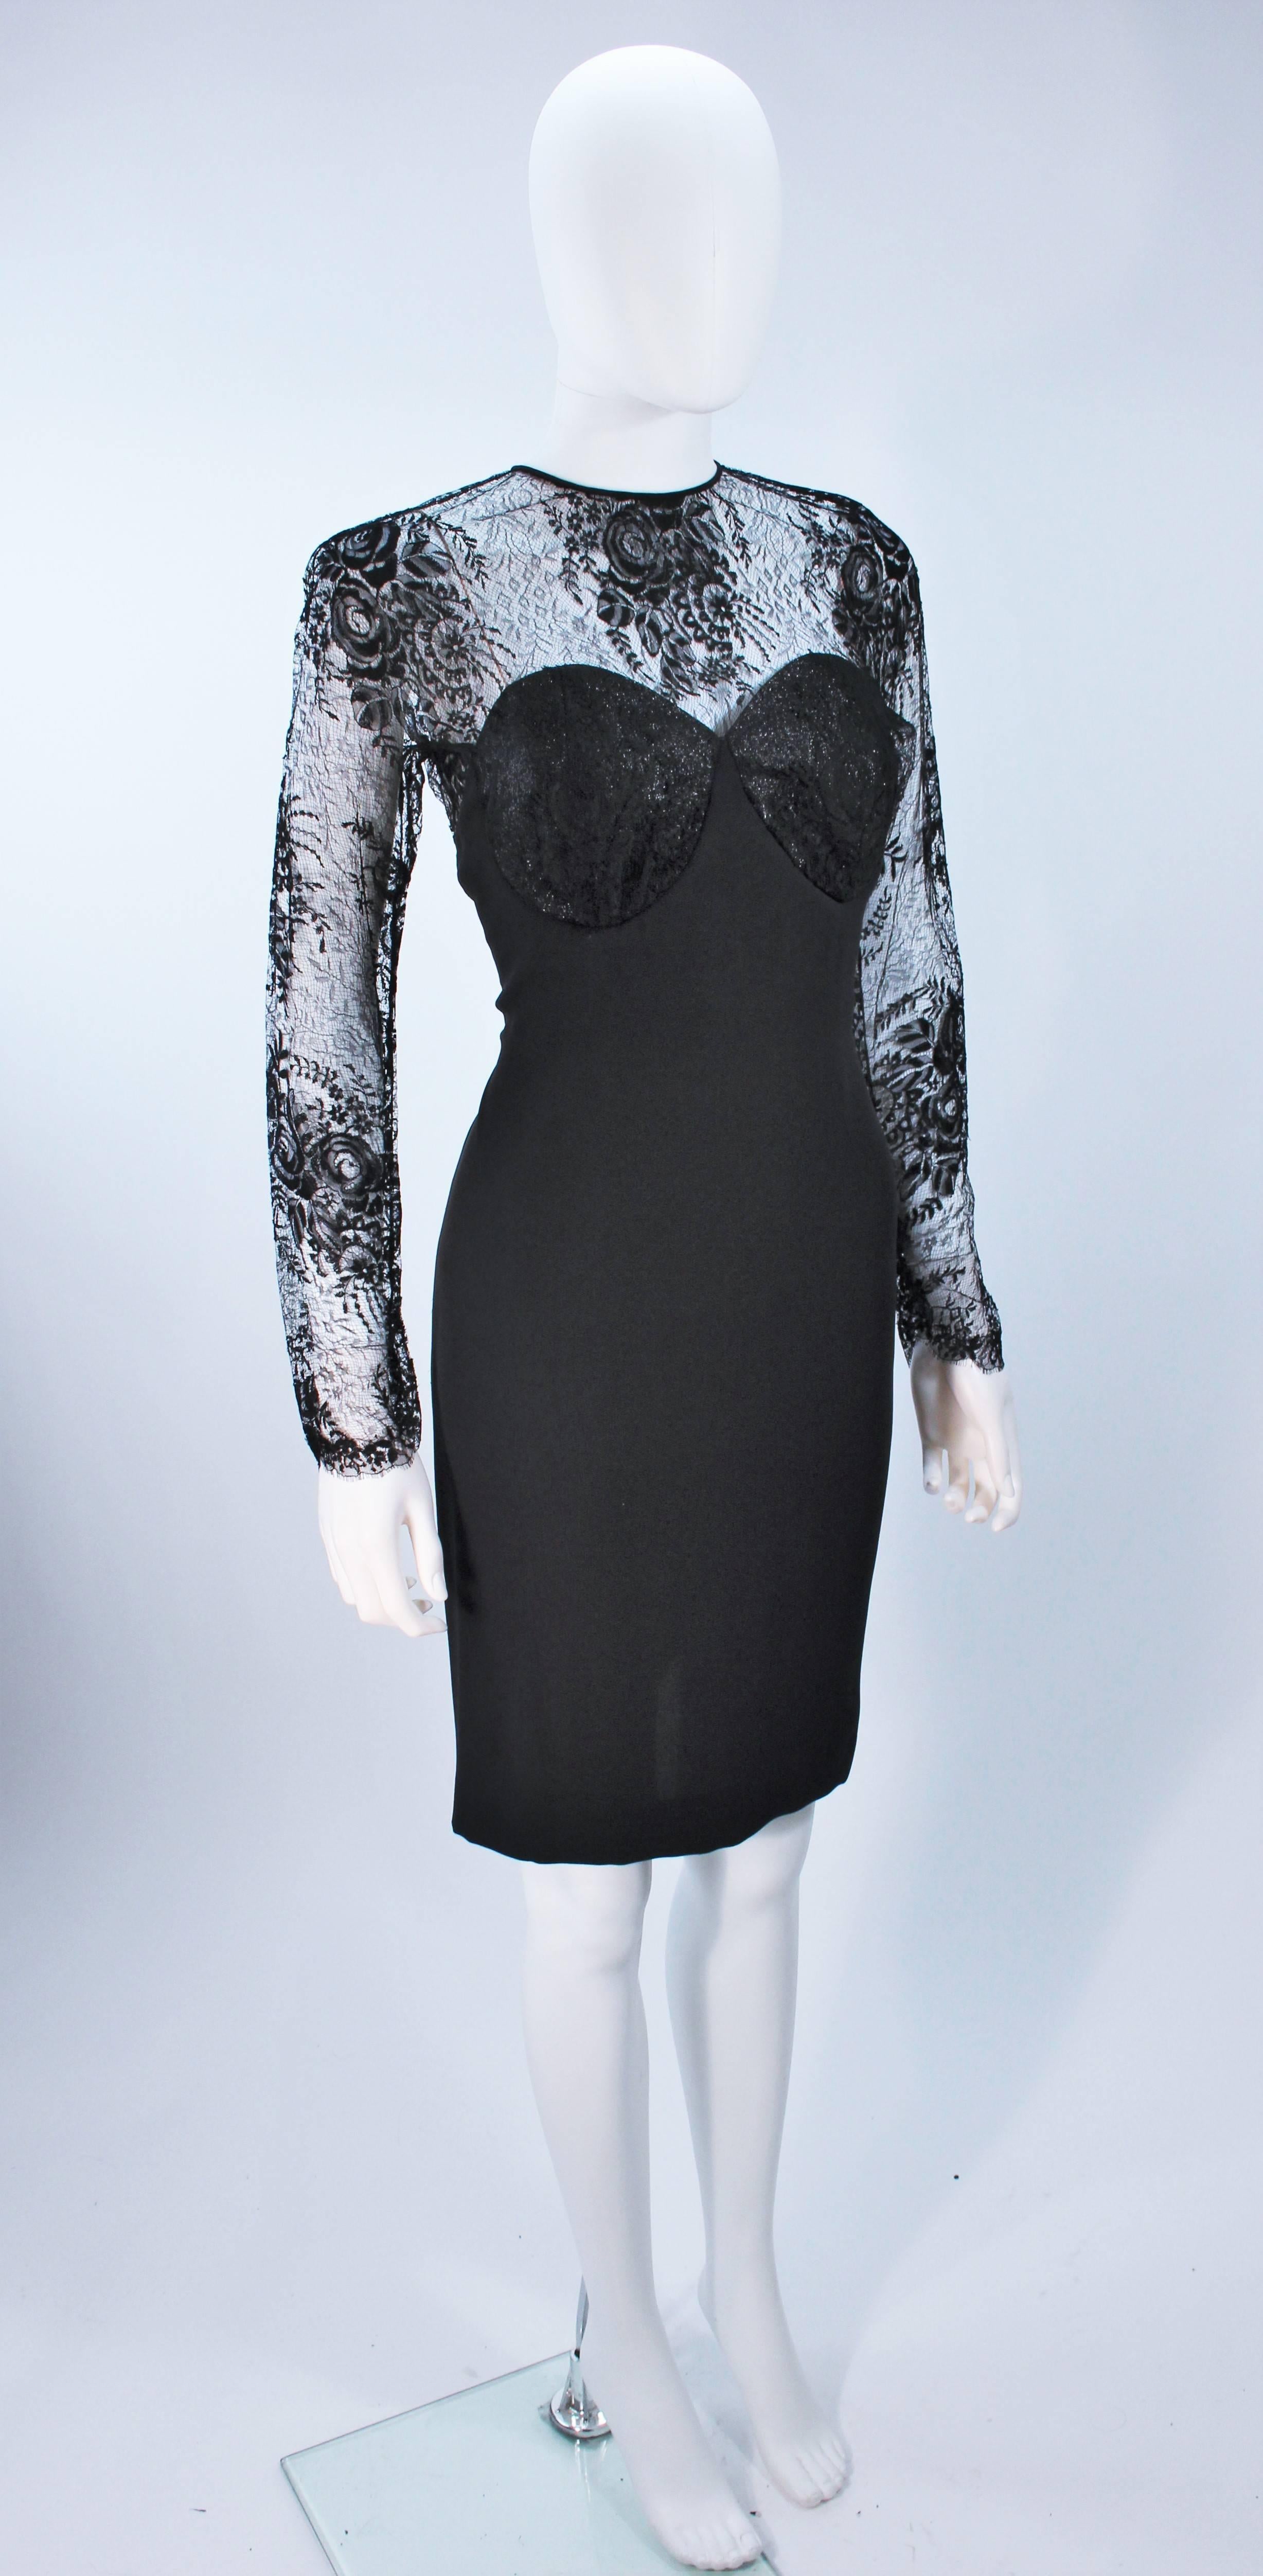 Women's GALANOS Black Lace Cocktail Dress with Metallic Accents Size 8-10